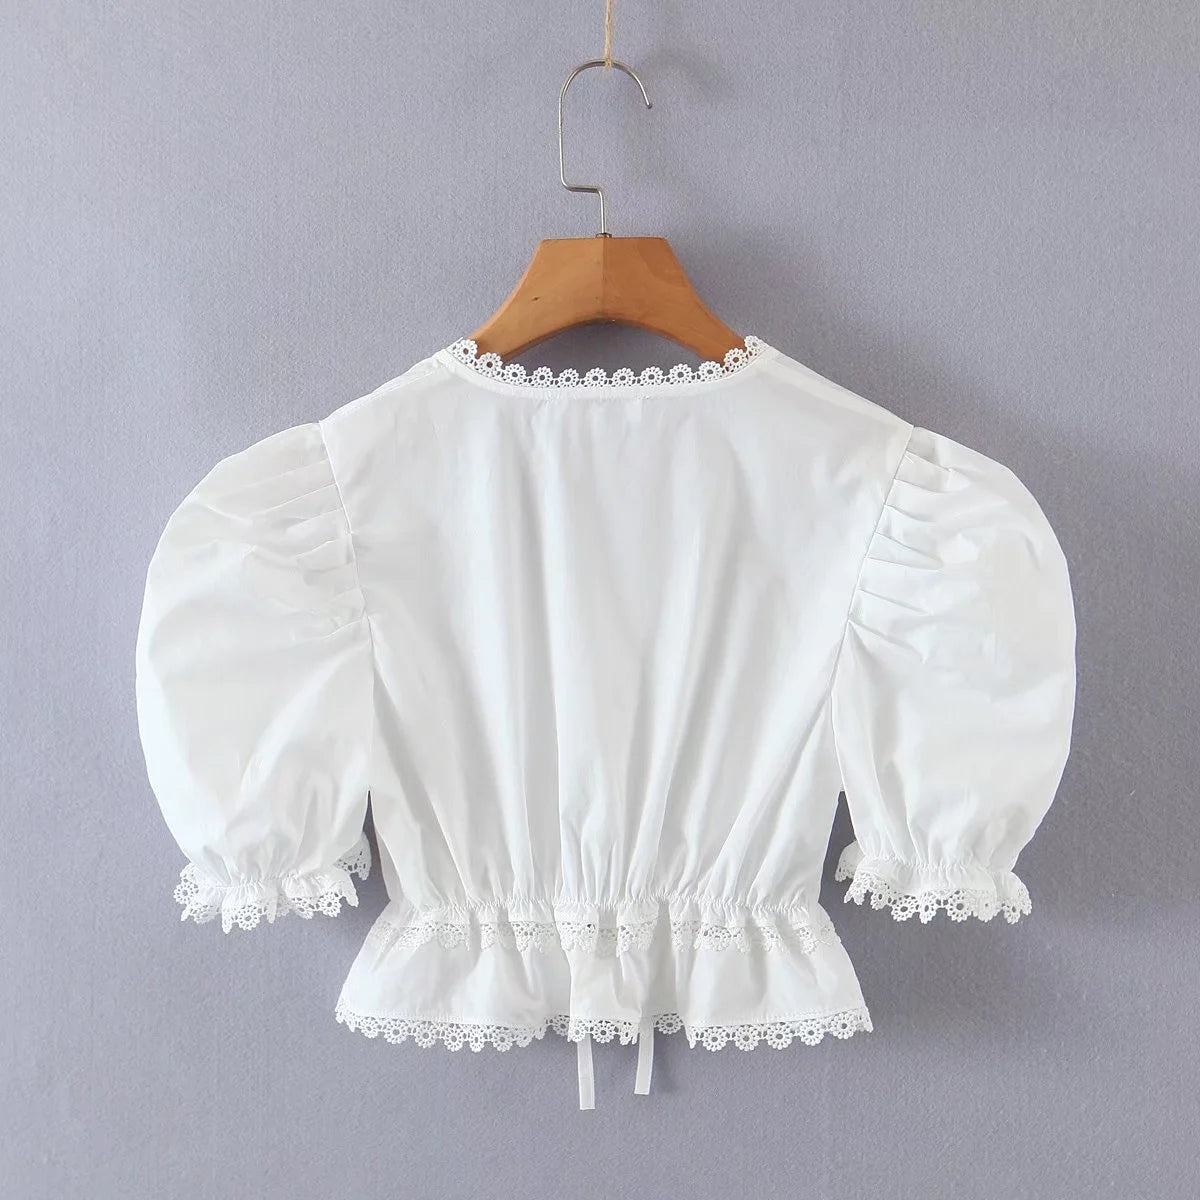 GypsyLady Casual Sexy Chic Cropped Blouse Shirt White Cotton Lace Summer Women Blouse Pull Sleeve Y2K Holiday Party Ladies Tops